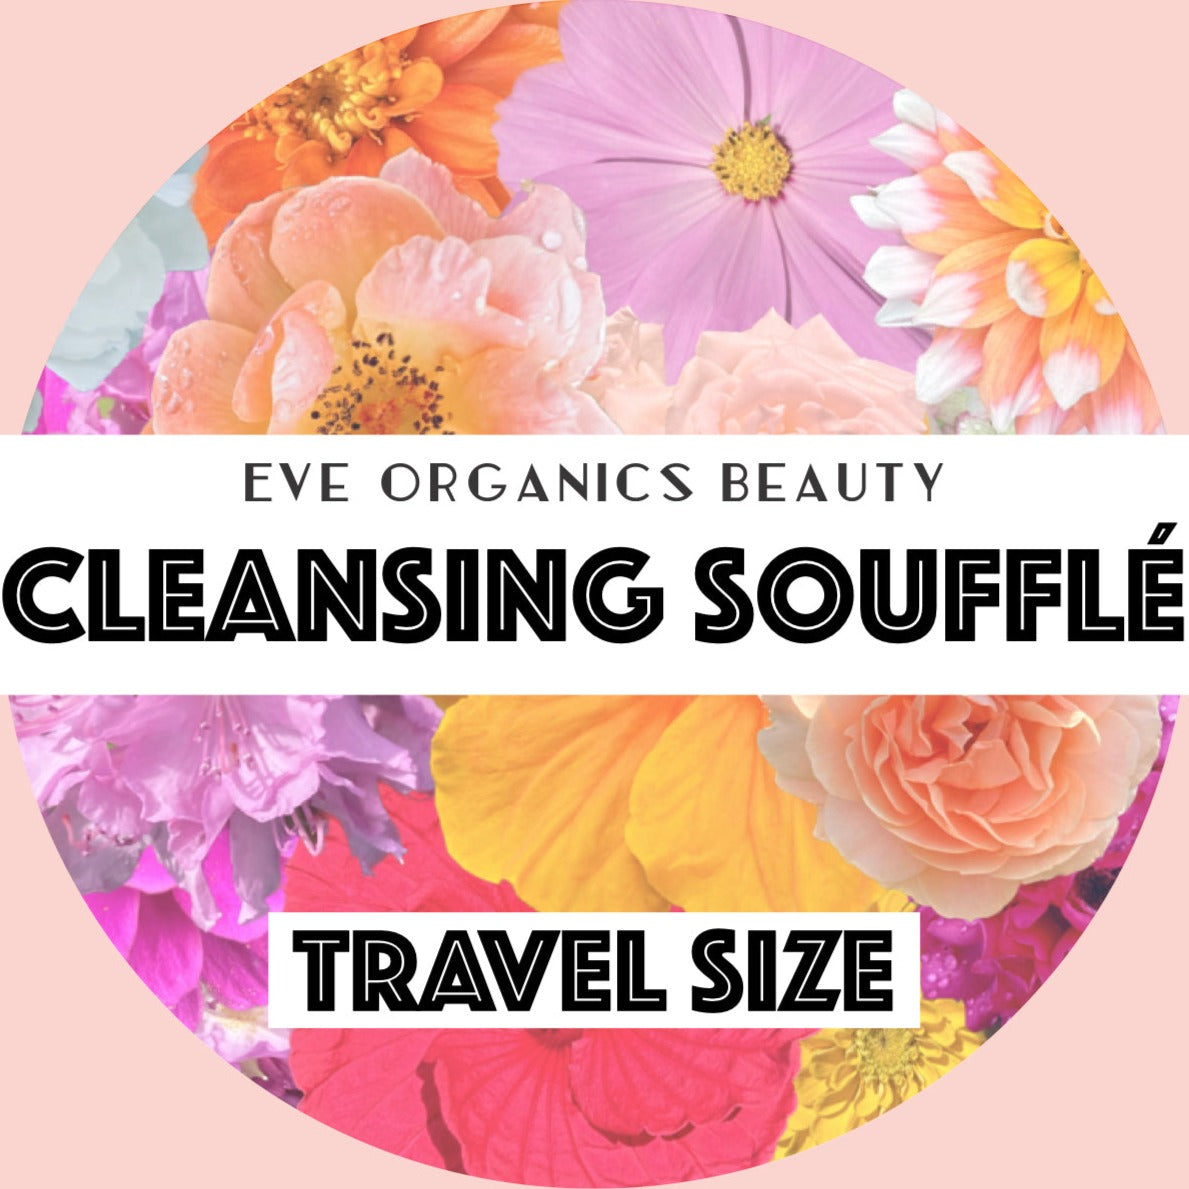 1 OZ TRAVEL SIZE CLEANSING SOUFFLE